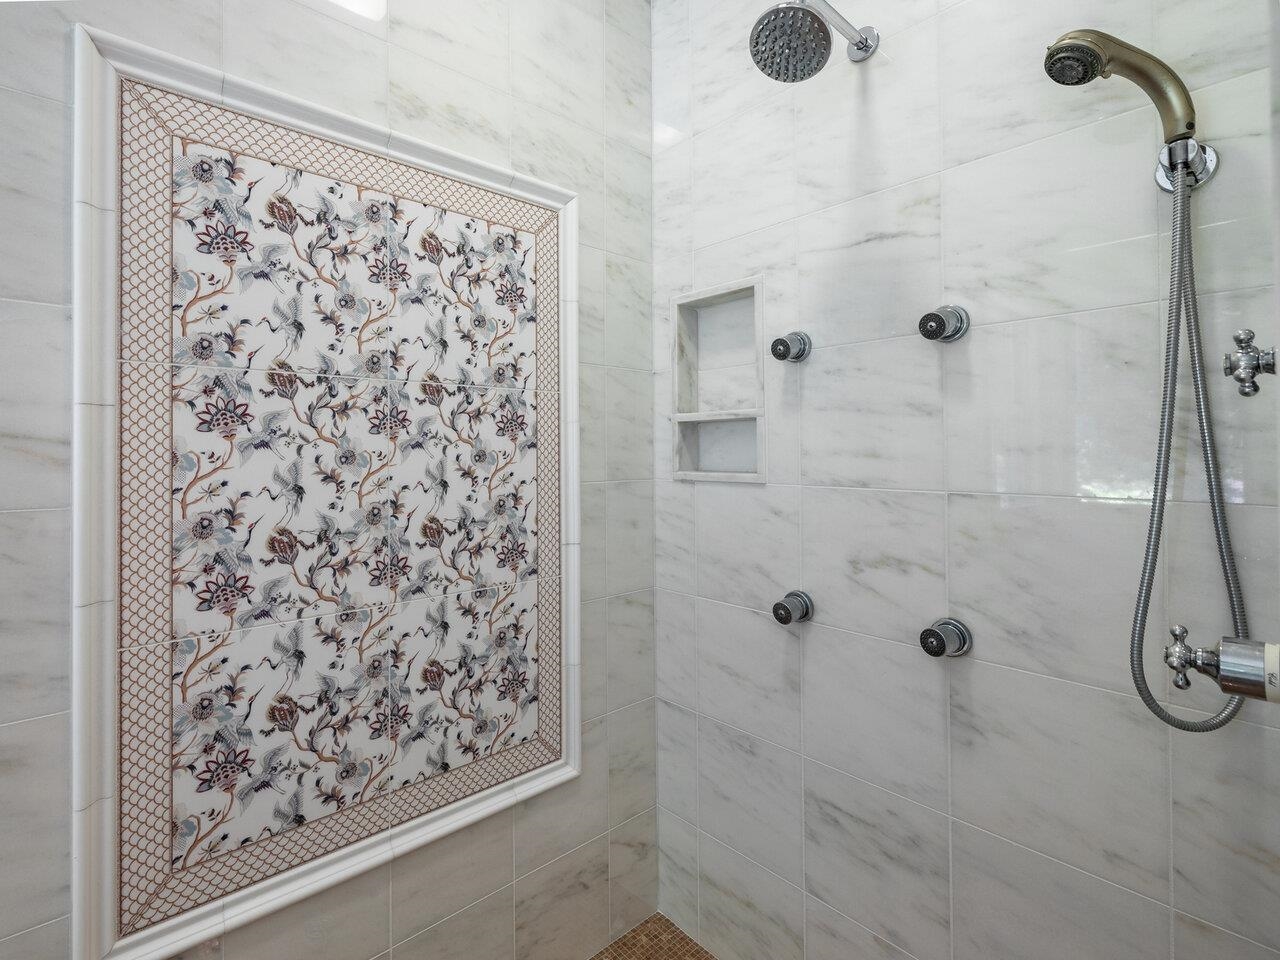 Beautifully tiled shower